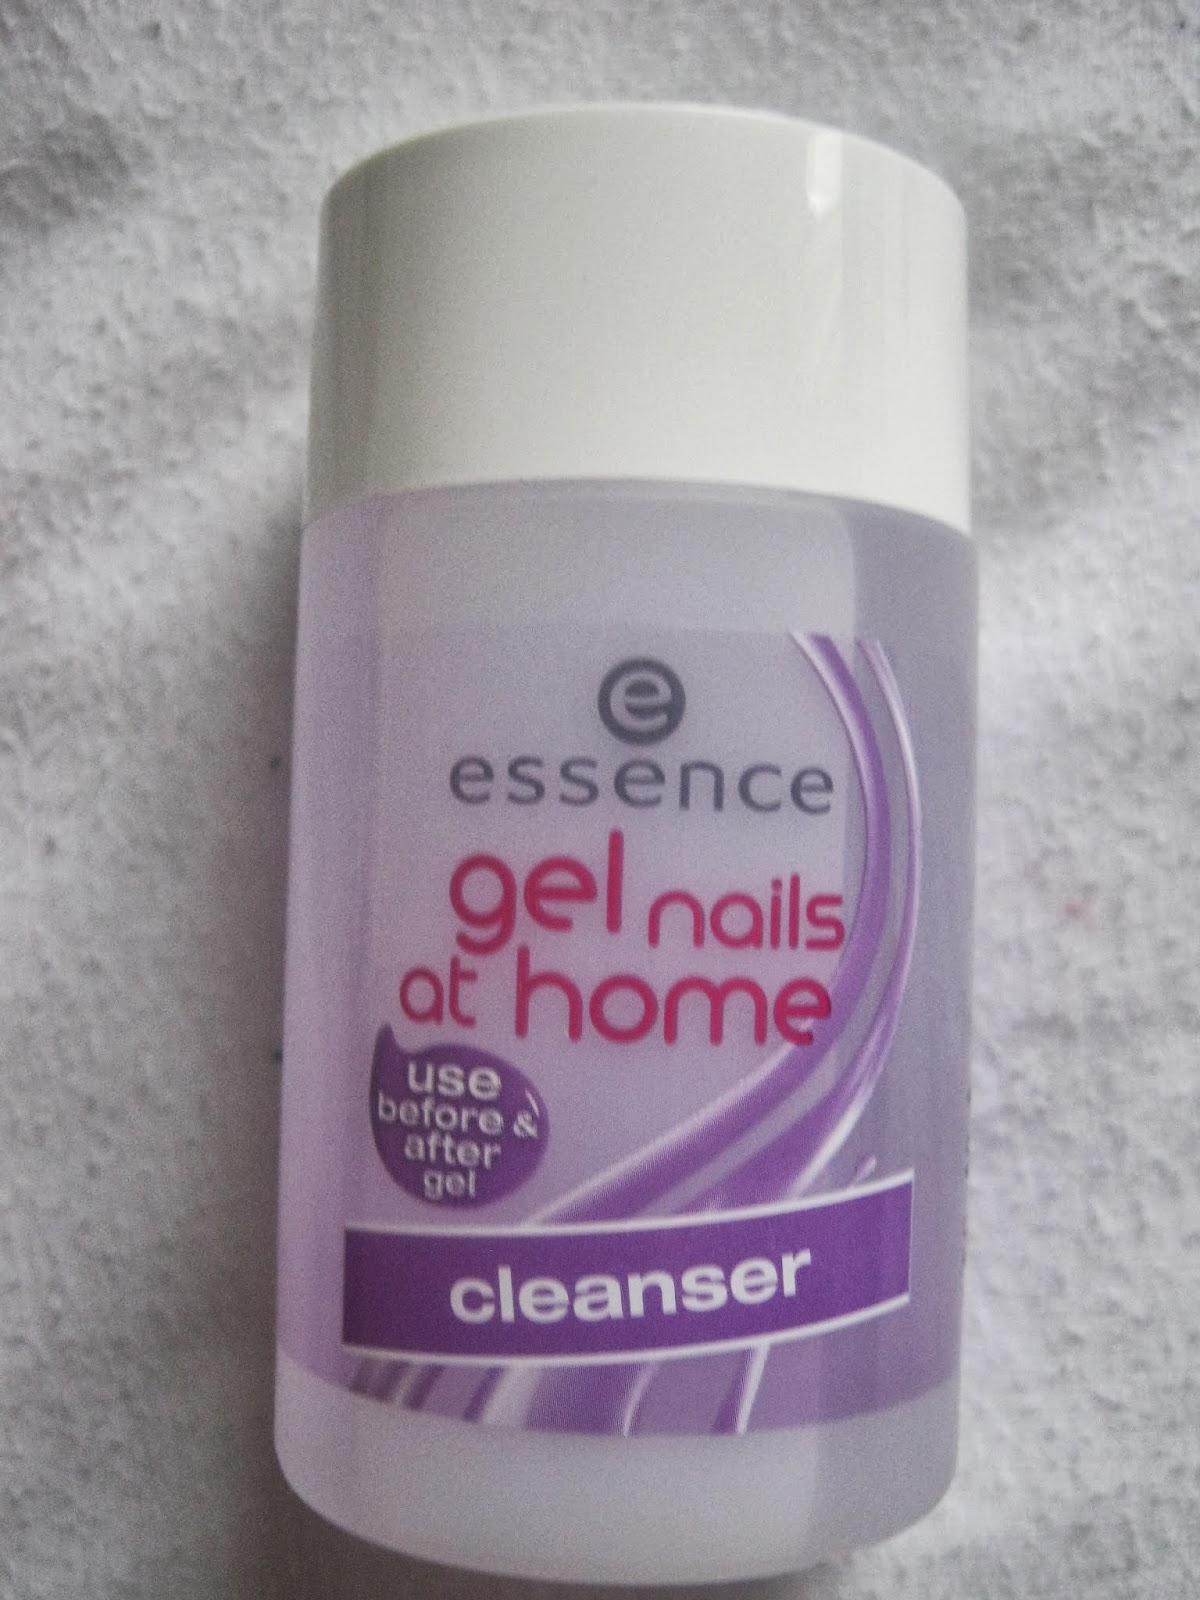 Lollovelife Essence Gel Nails At Home Review